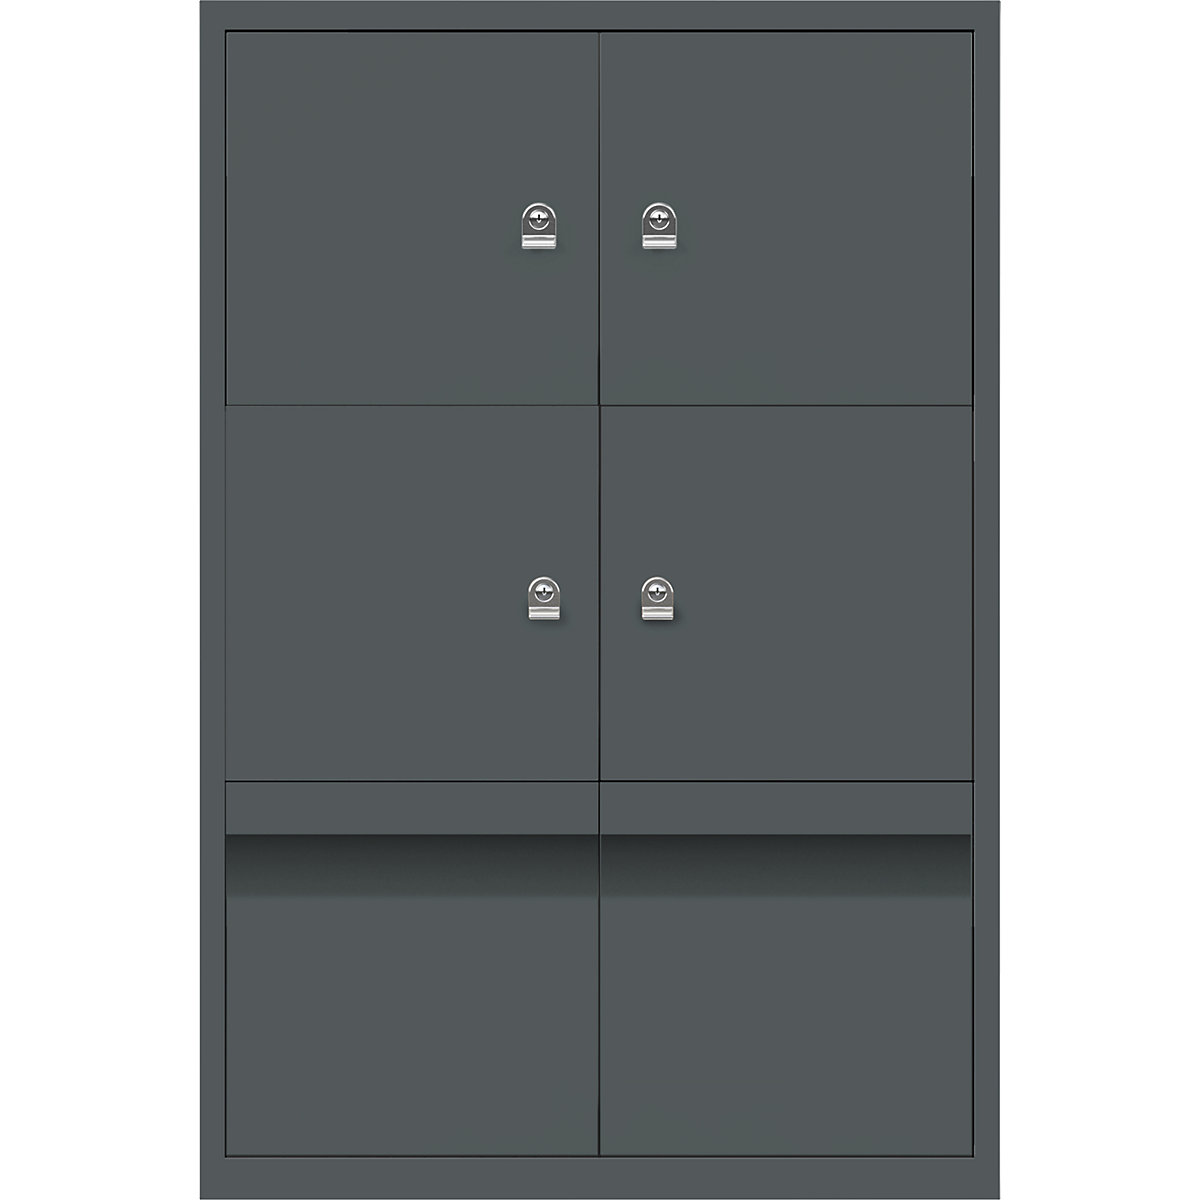 LateralFile™ lodge – BISLEY, with 4 lockable compartments and 2 drawers, height 375 mm each, slate-32